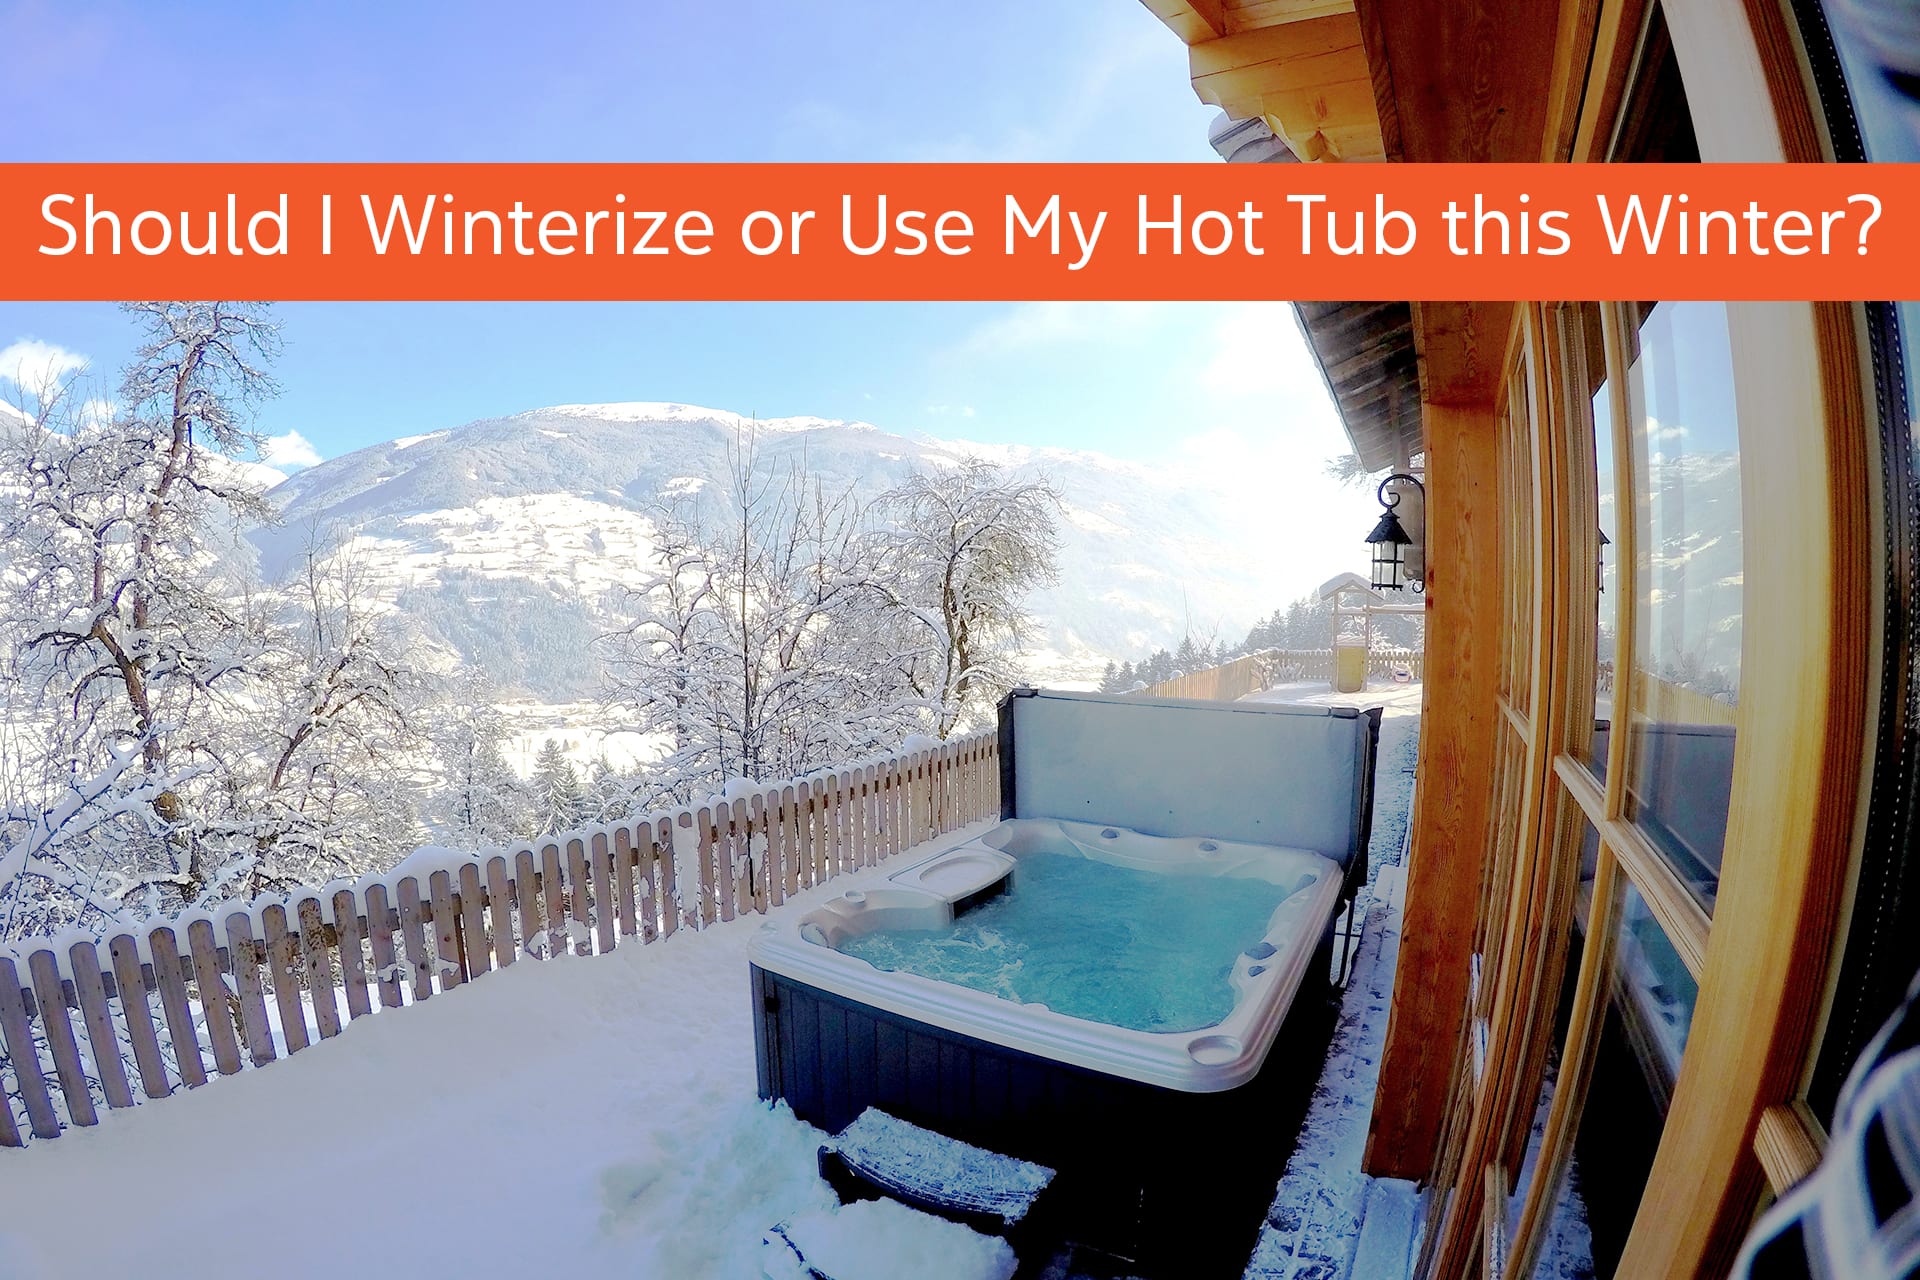 Should I Winterize or Use My Hot Tub This Winter?